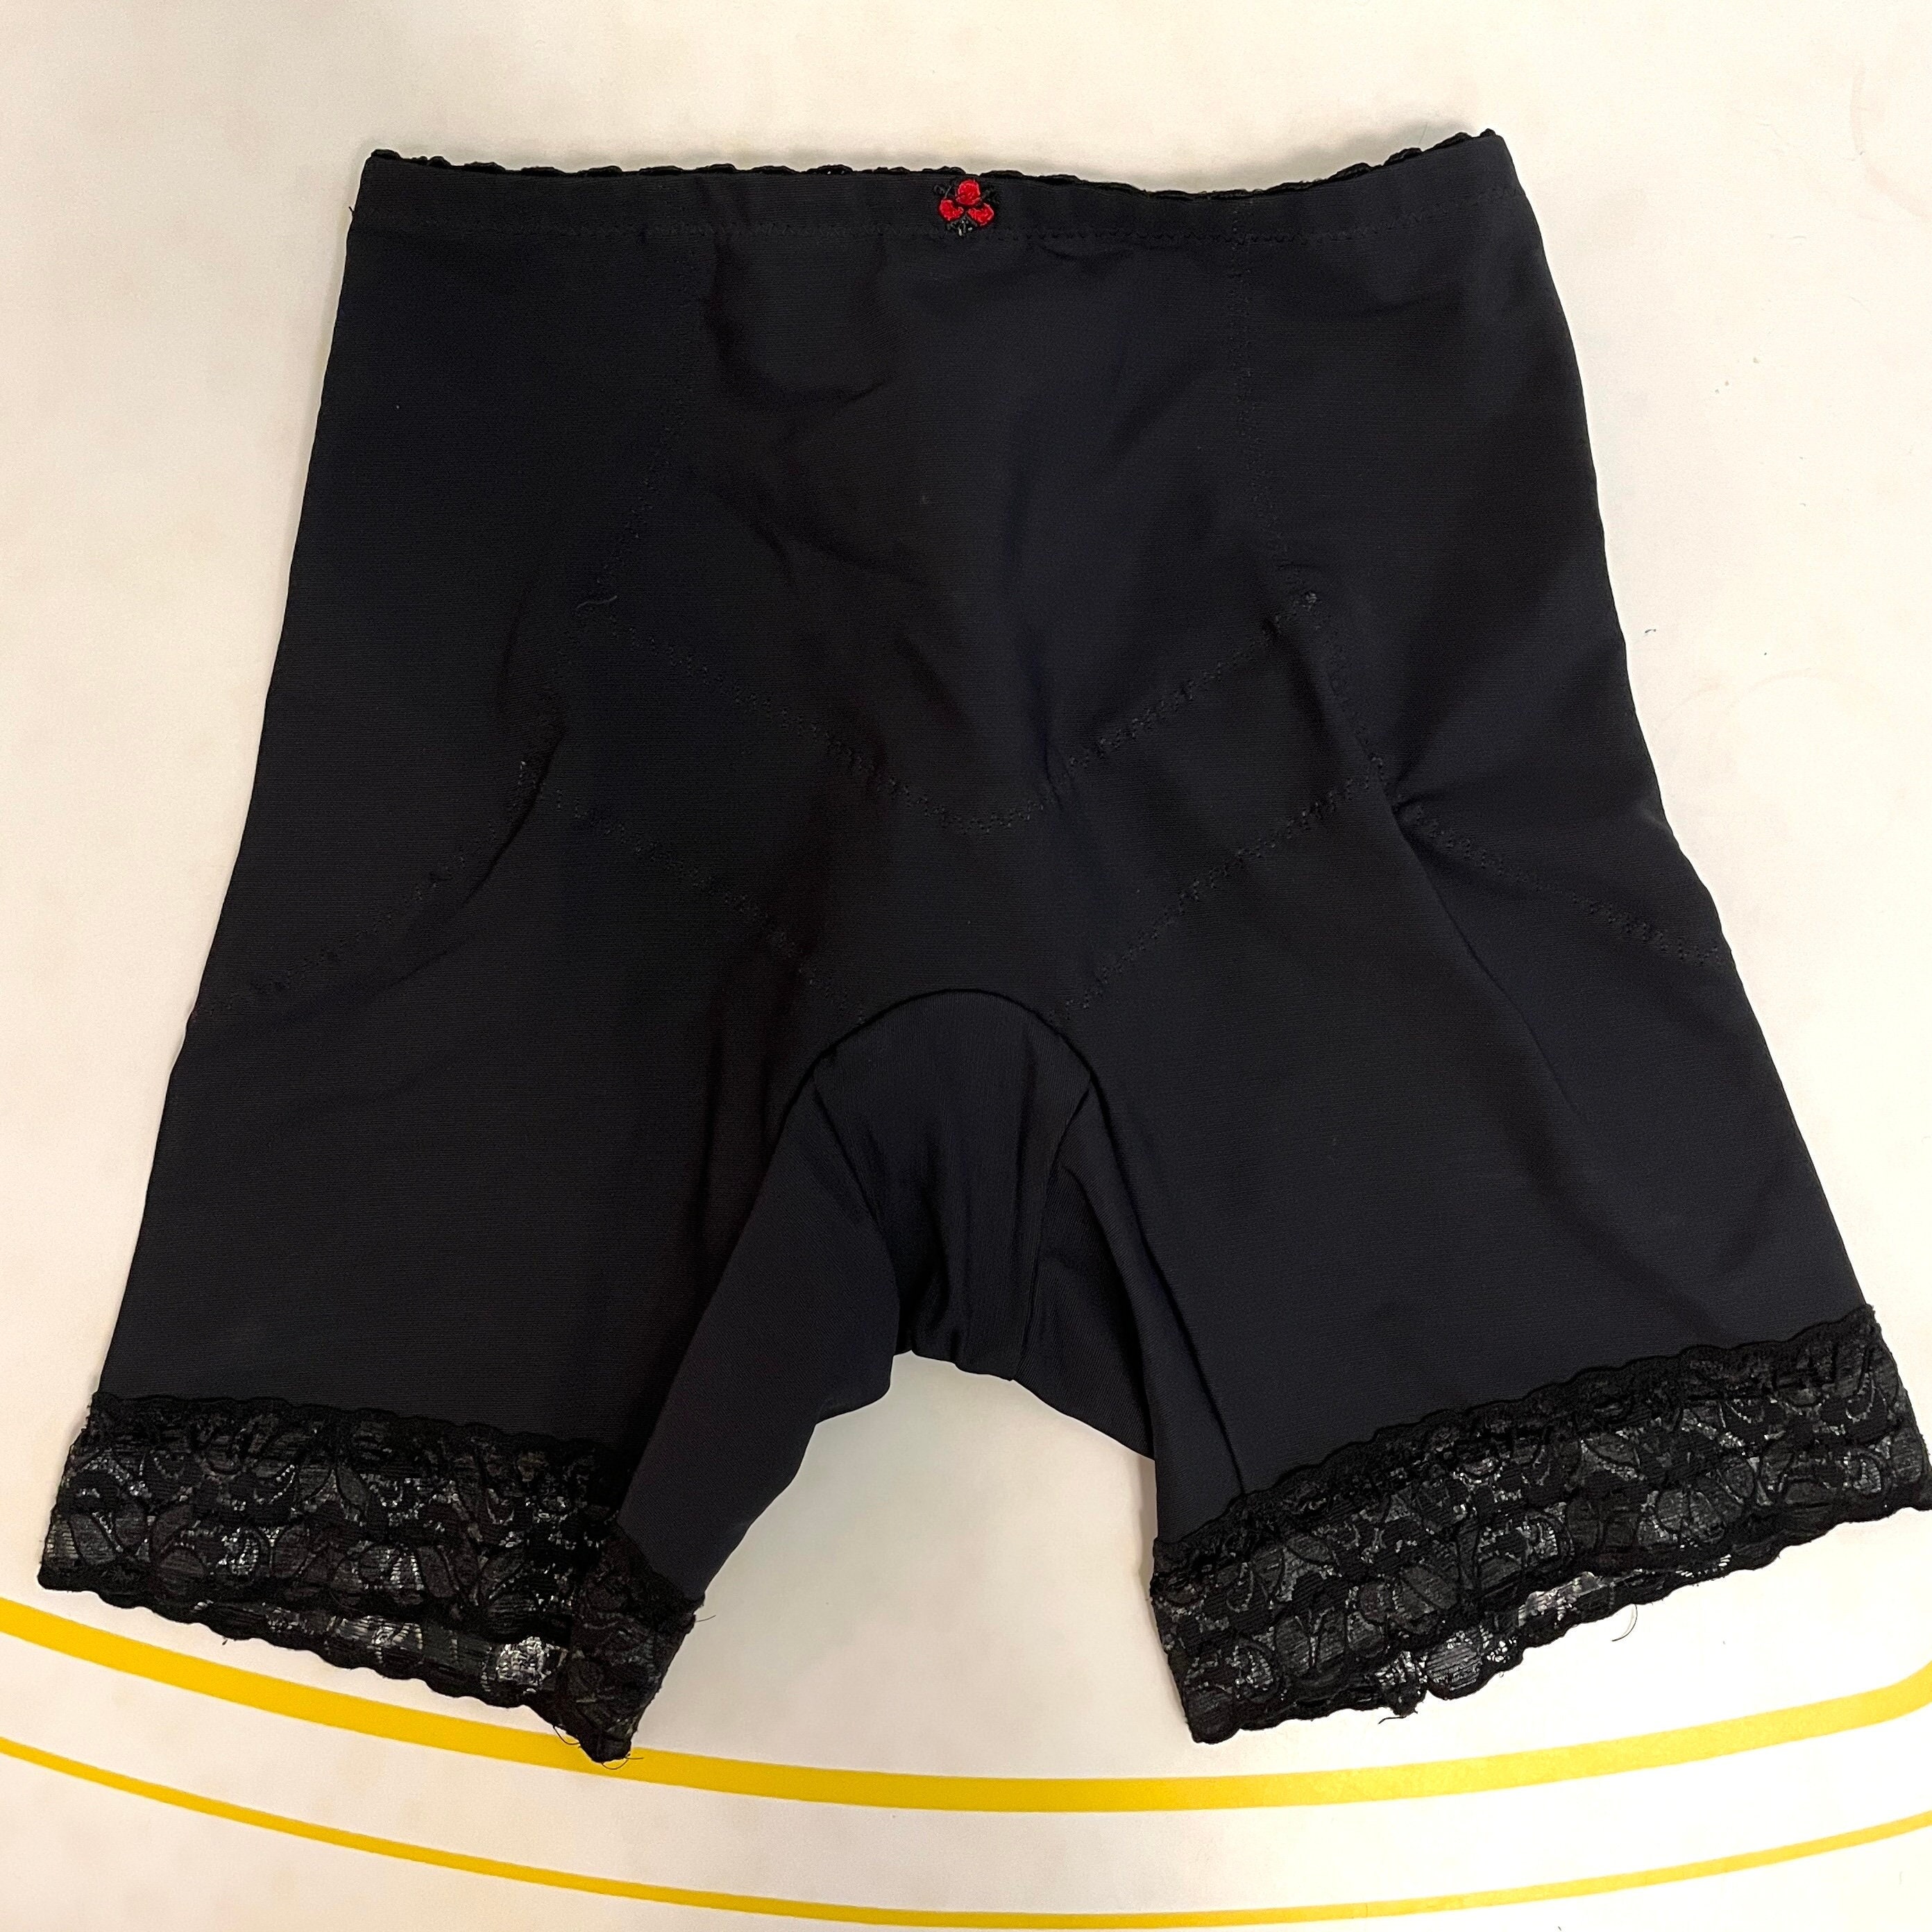 Vintage Flexees Panty Girdle Size L Large Black Union Label Made in the USA  -  Israel